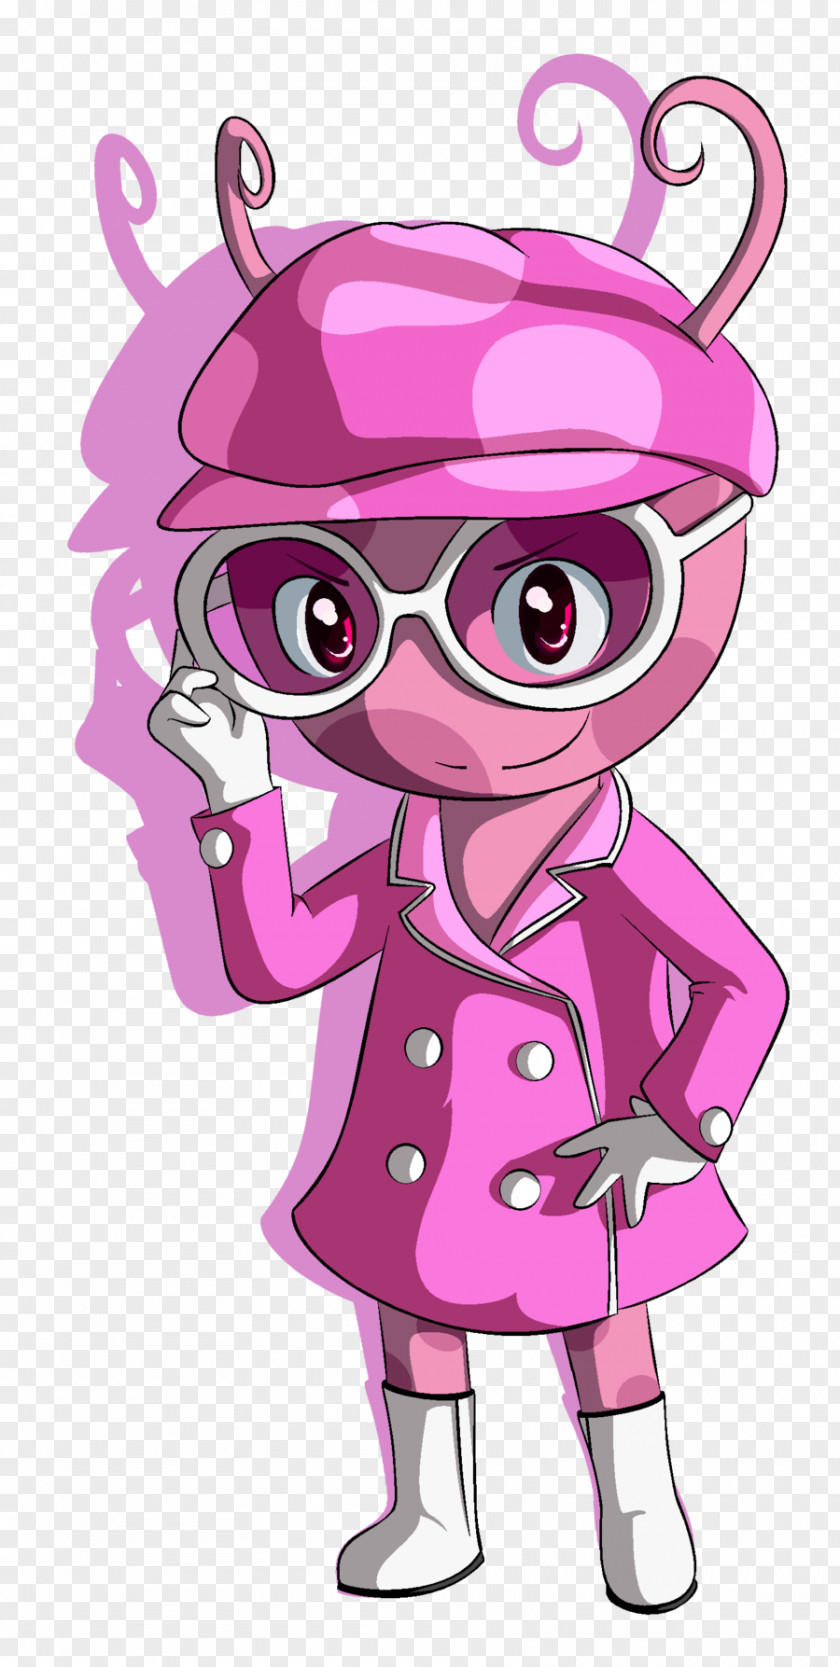 Backyardigans Uniqua Lady In Pink Nick Jr. Image Front Page News! PNG